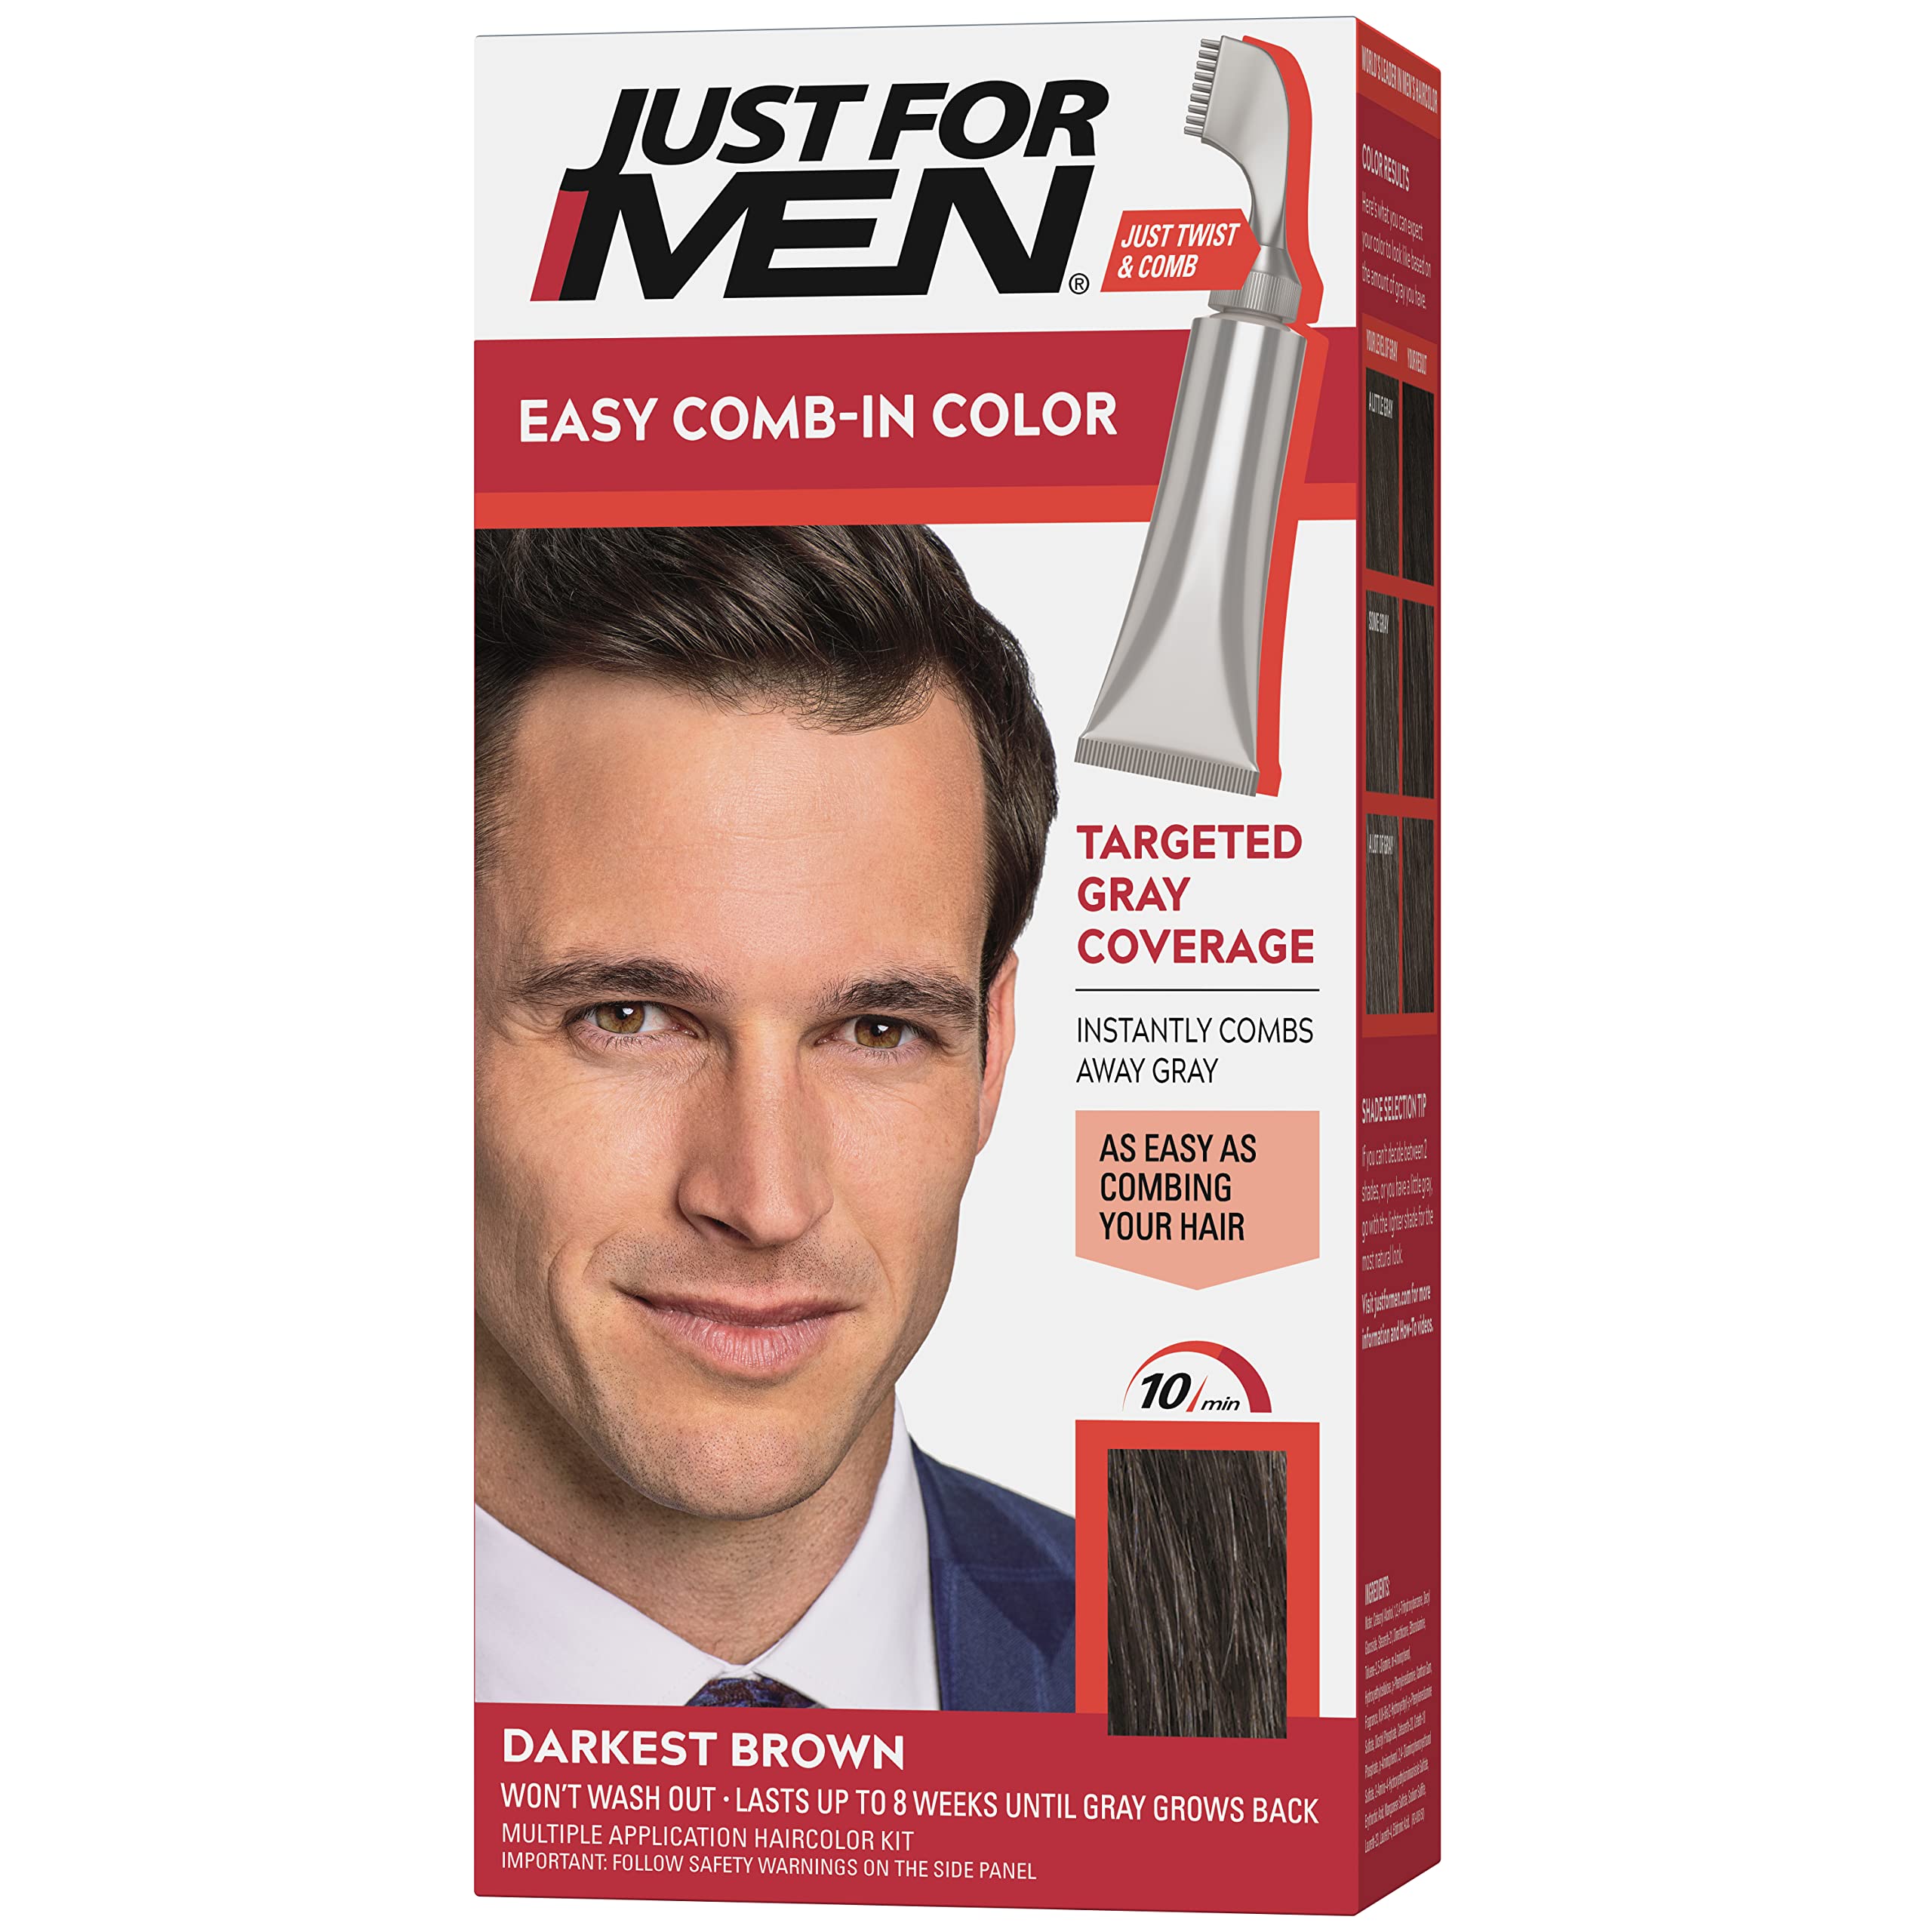 Just For Men Easy Comb-In Color Mens Hair Dye, Easy No Mix Application with Comb Applicator - Darkest Brown, A-50, Pack of 1